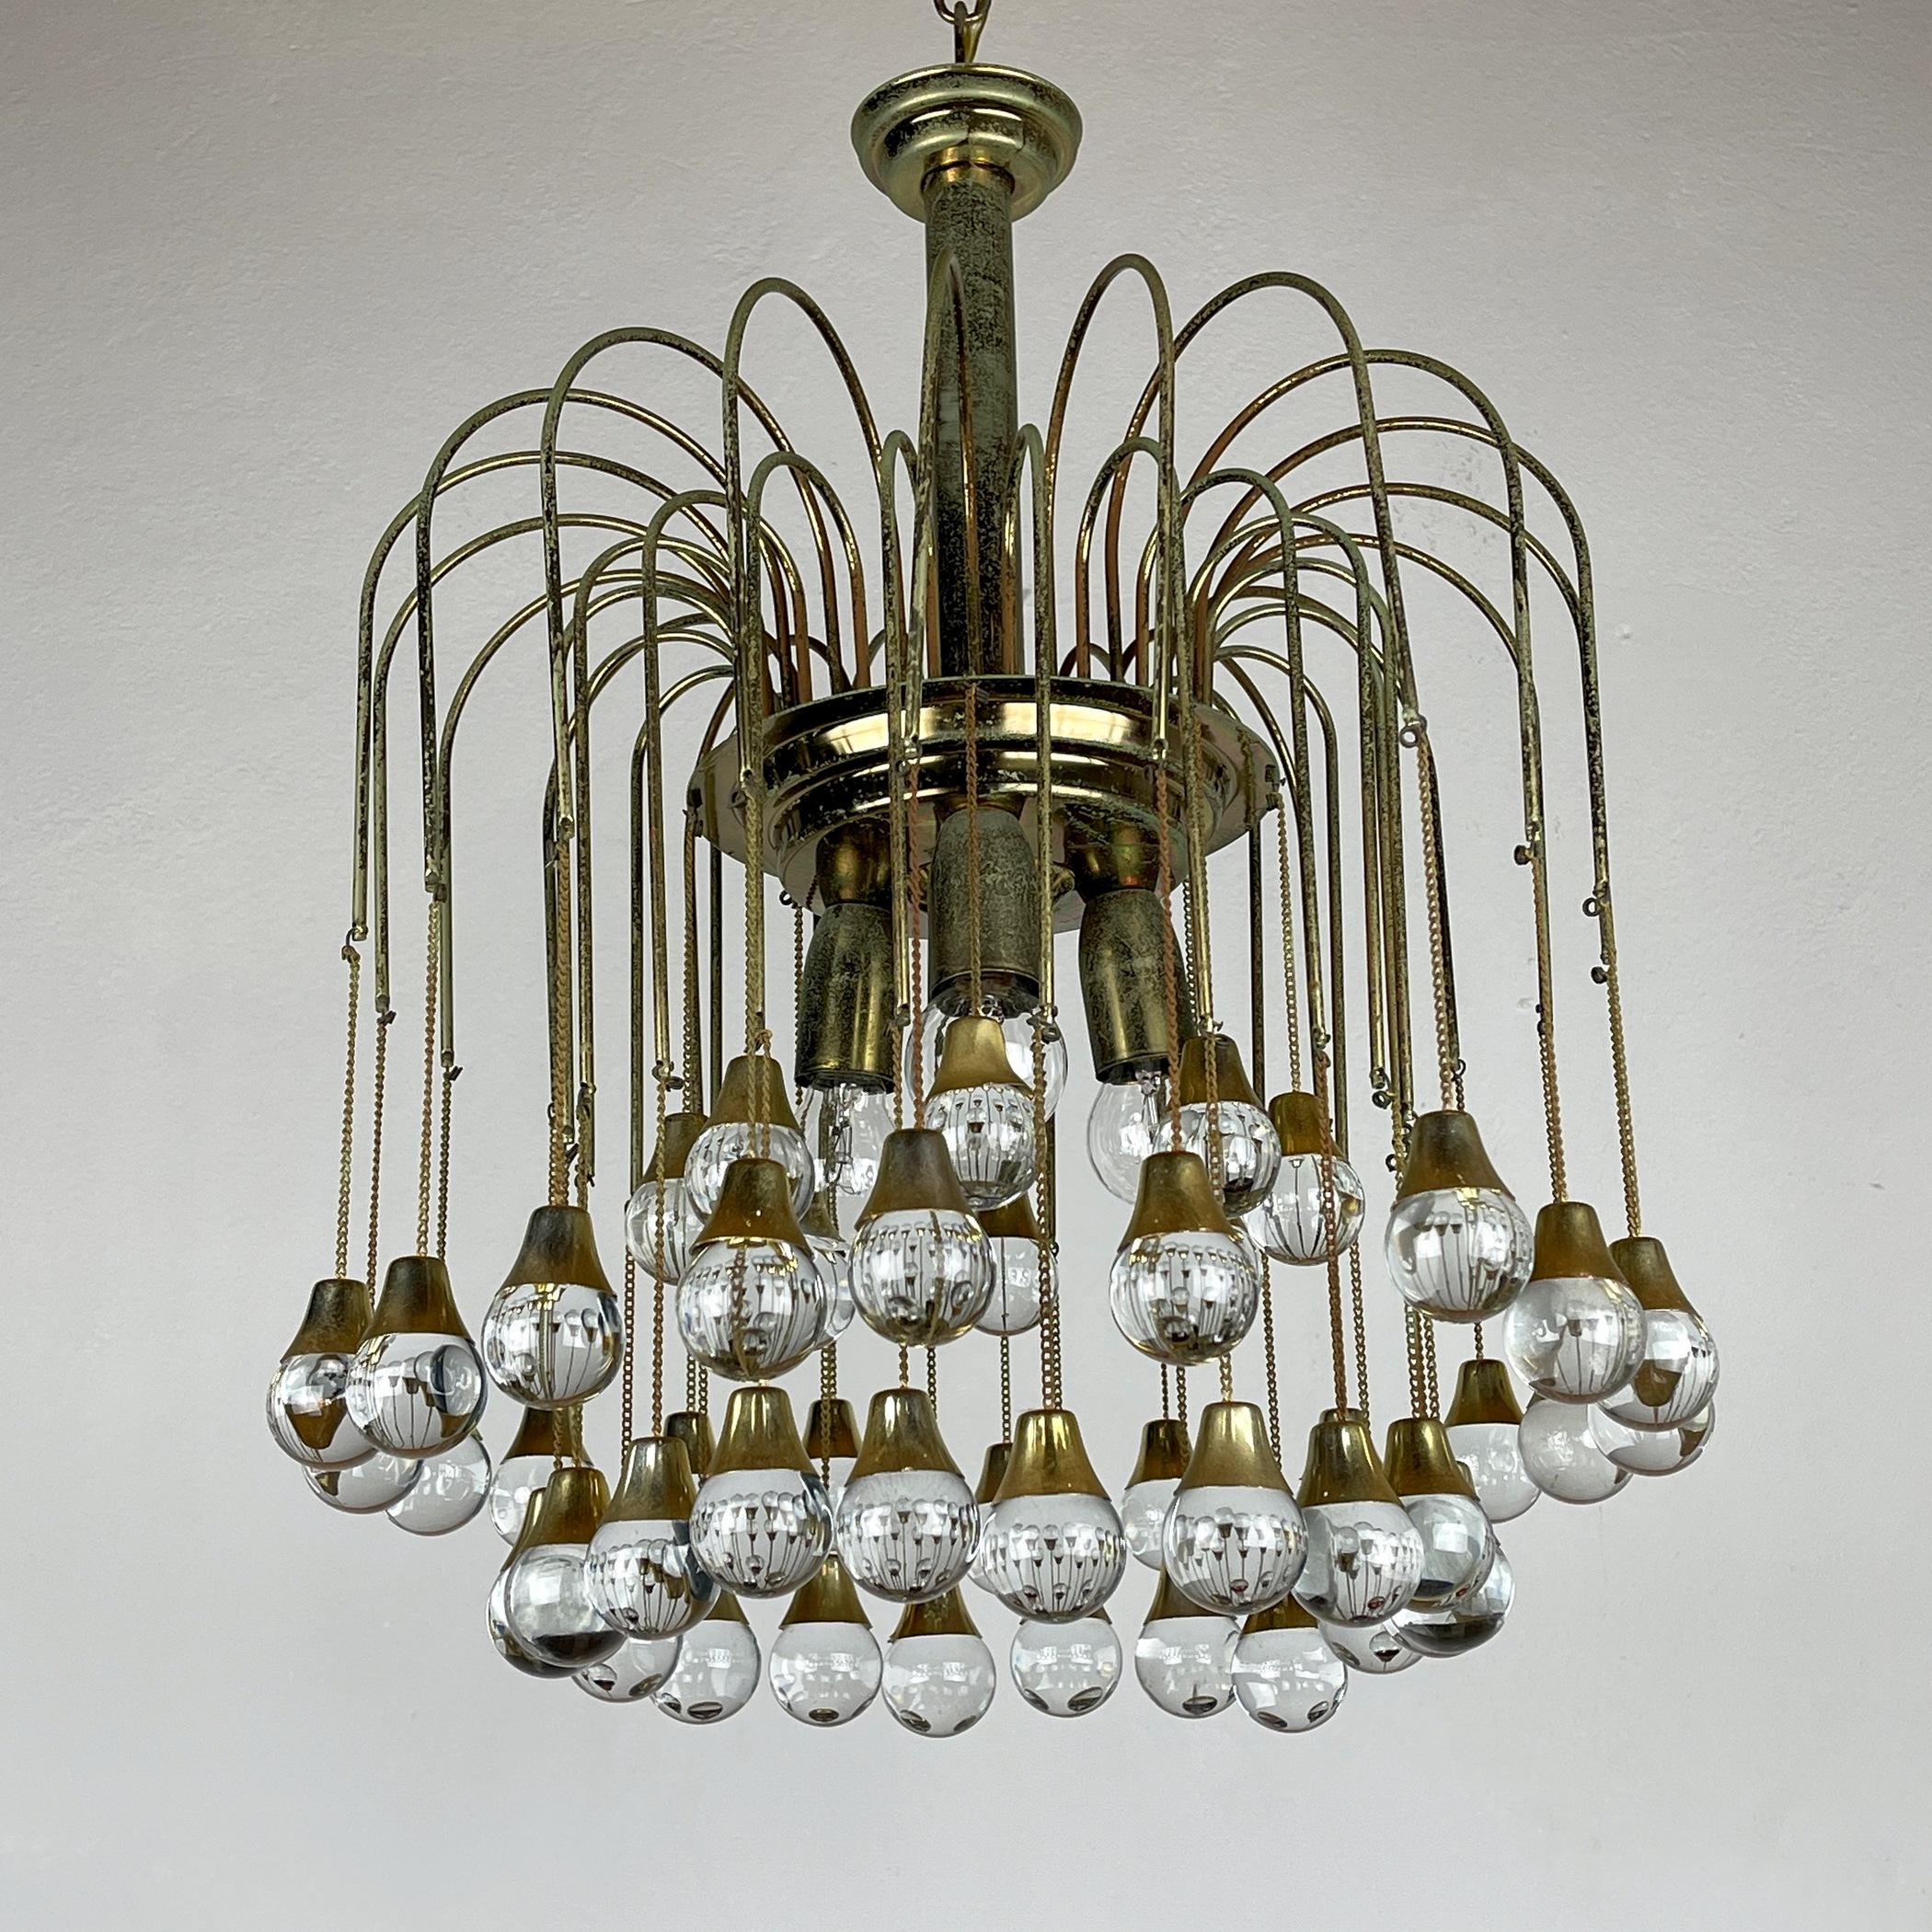 Vintage Cascade Glass Chandelier Italy 1960s Brass and 48 Glass Balls 12